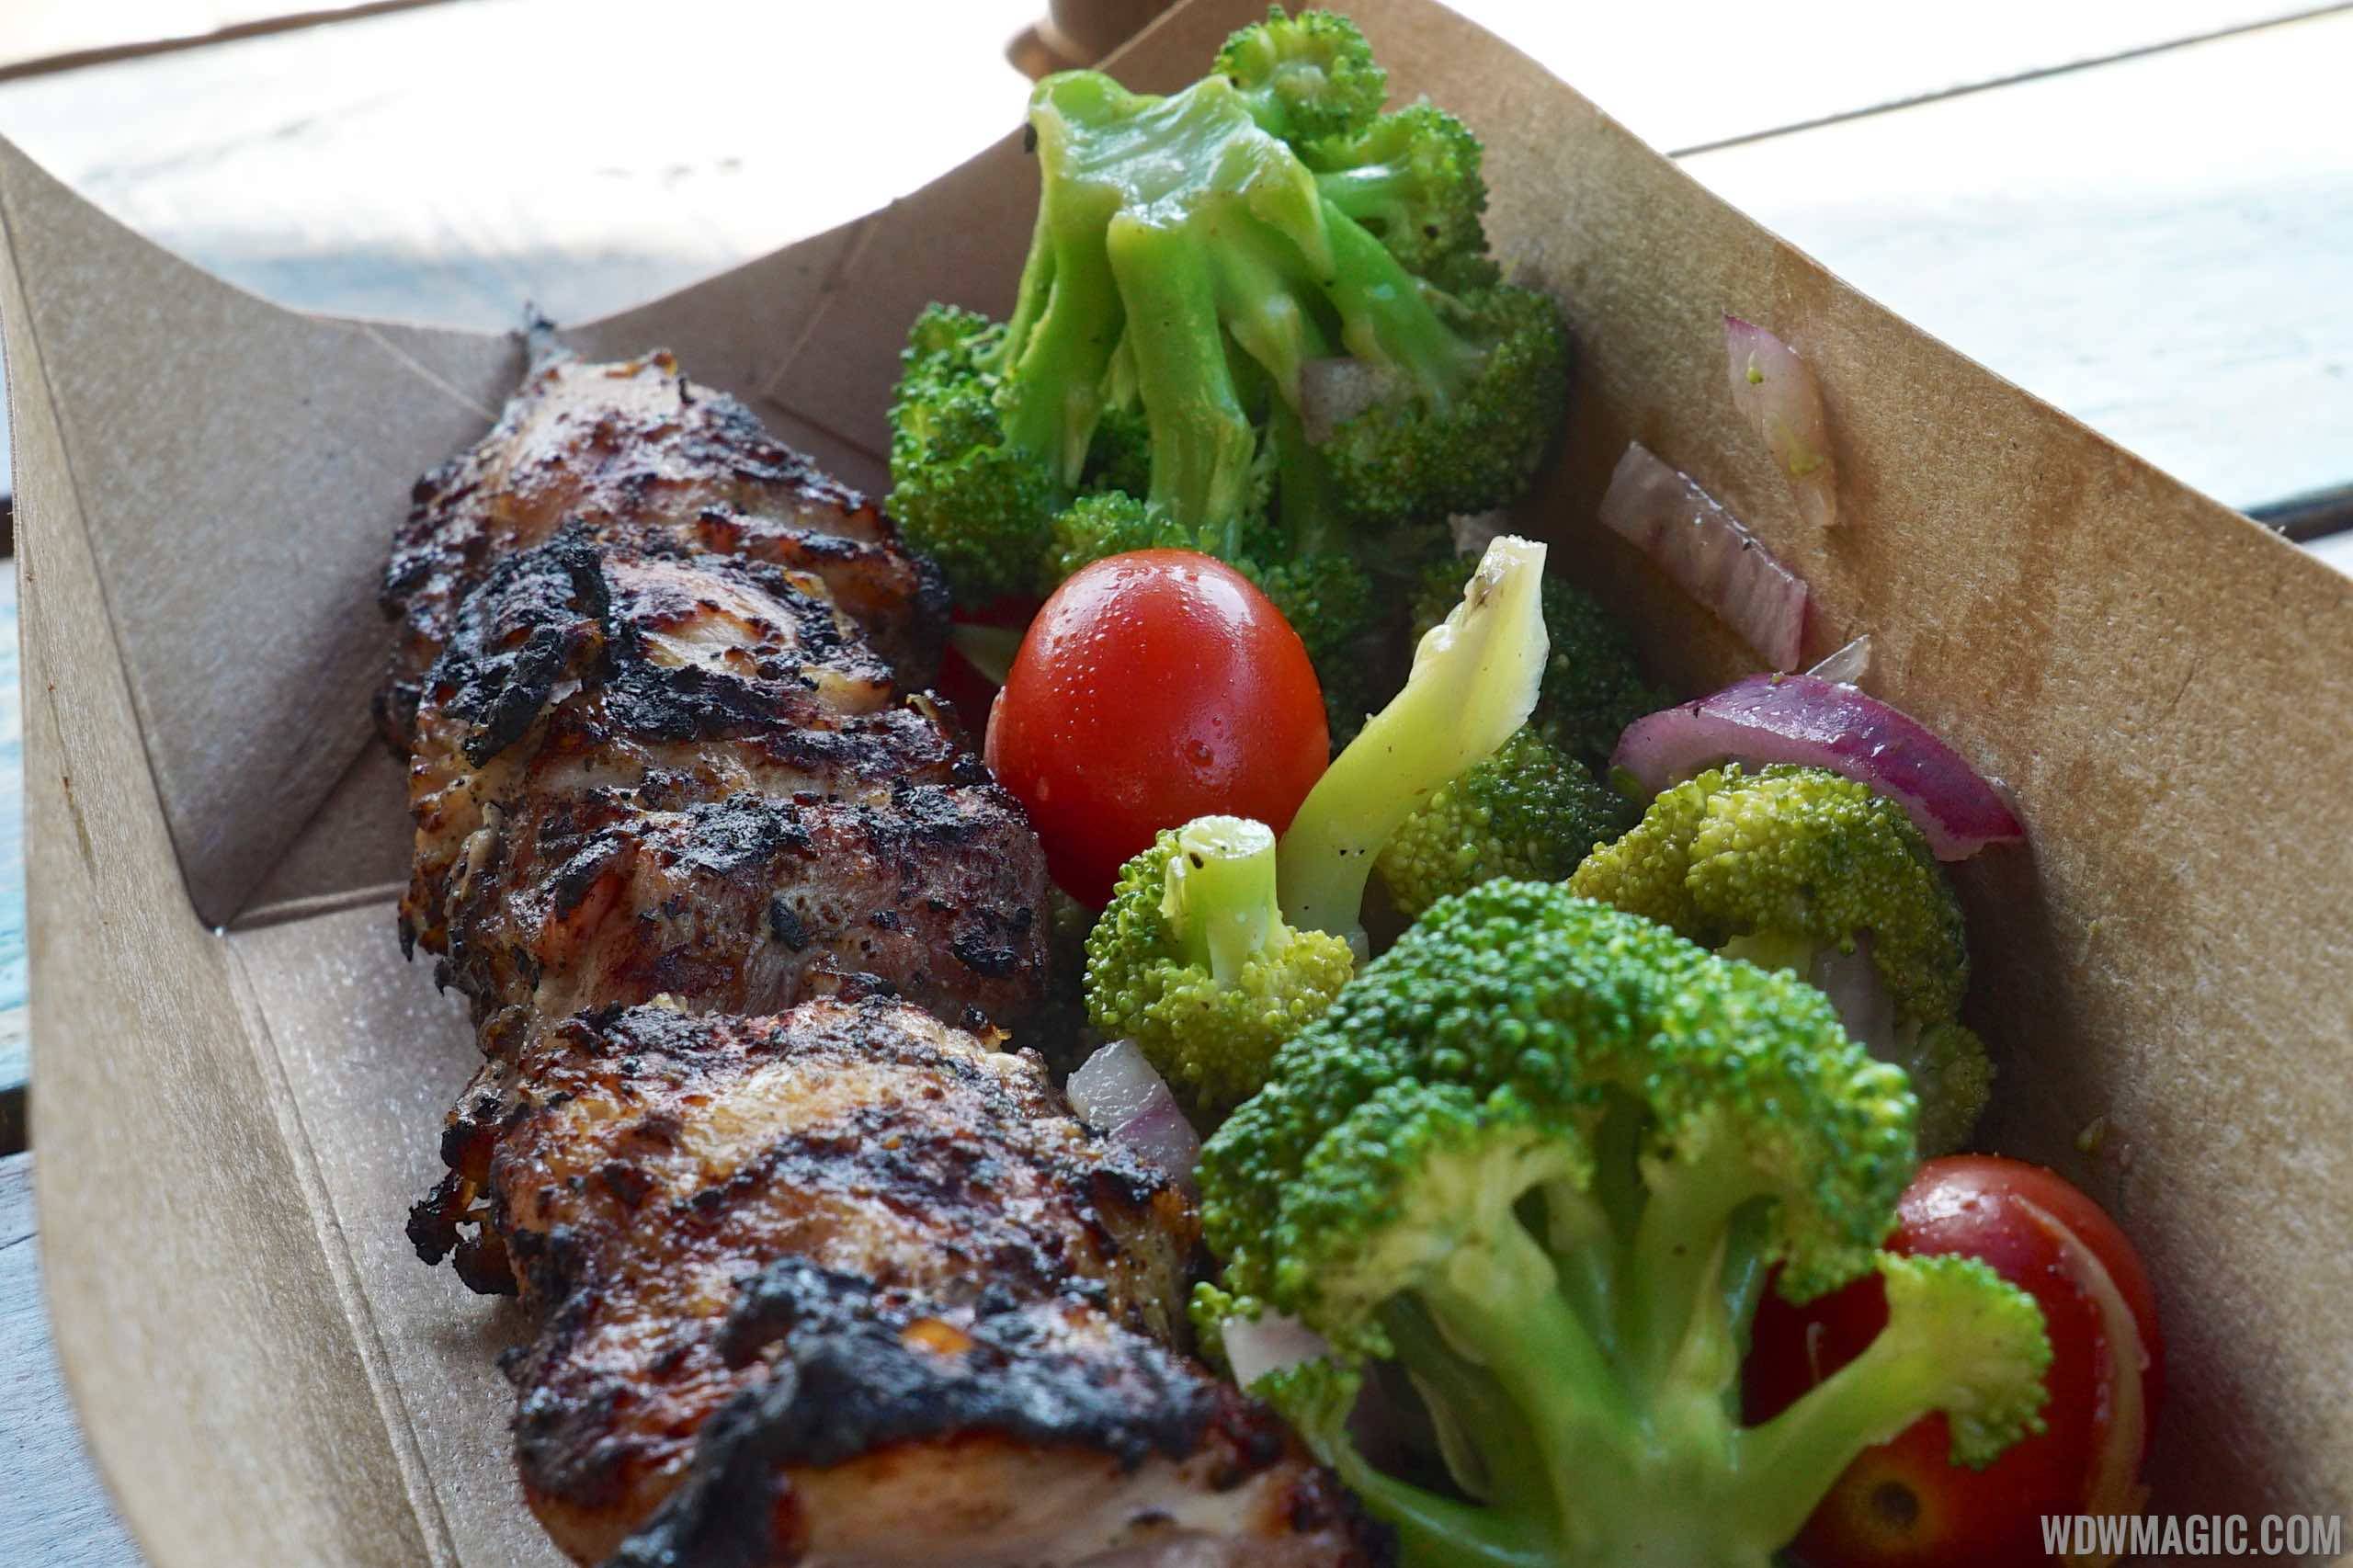 Harambe Market Food - Chicken Skewer with broccoli and tomato salad $8.99